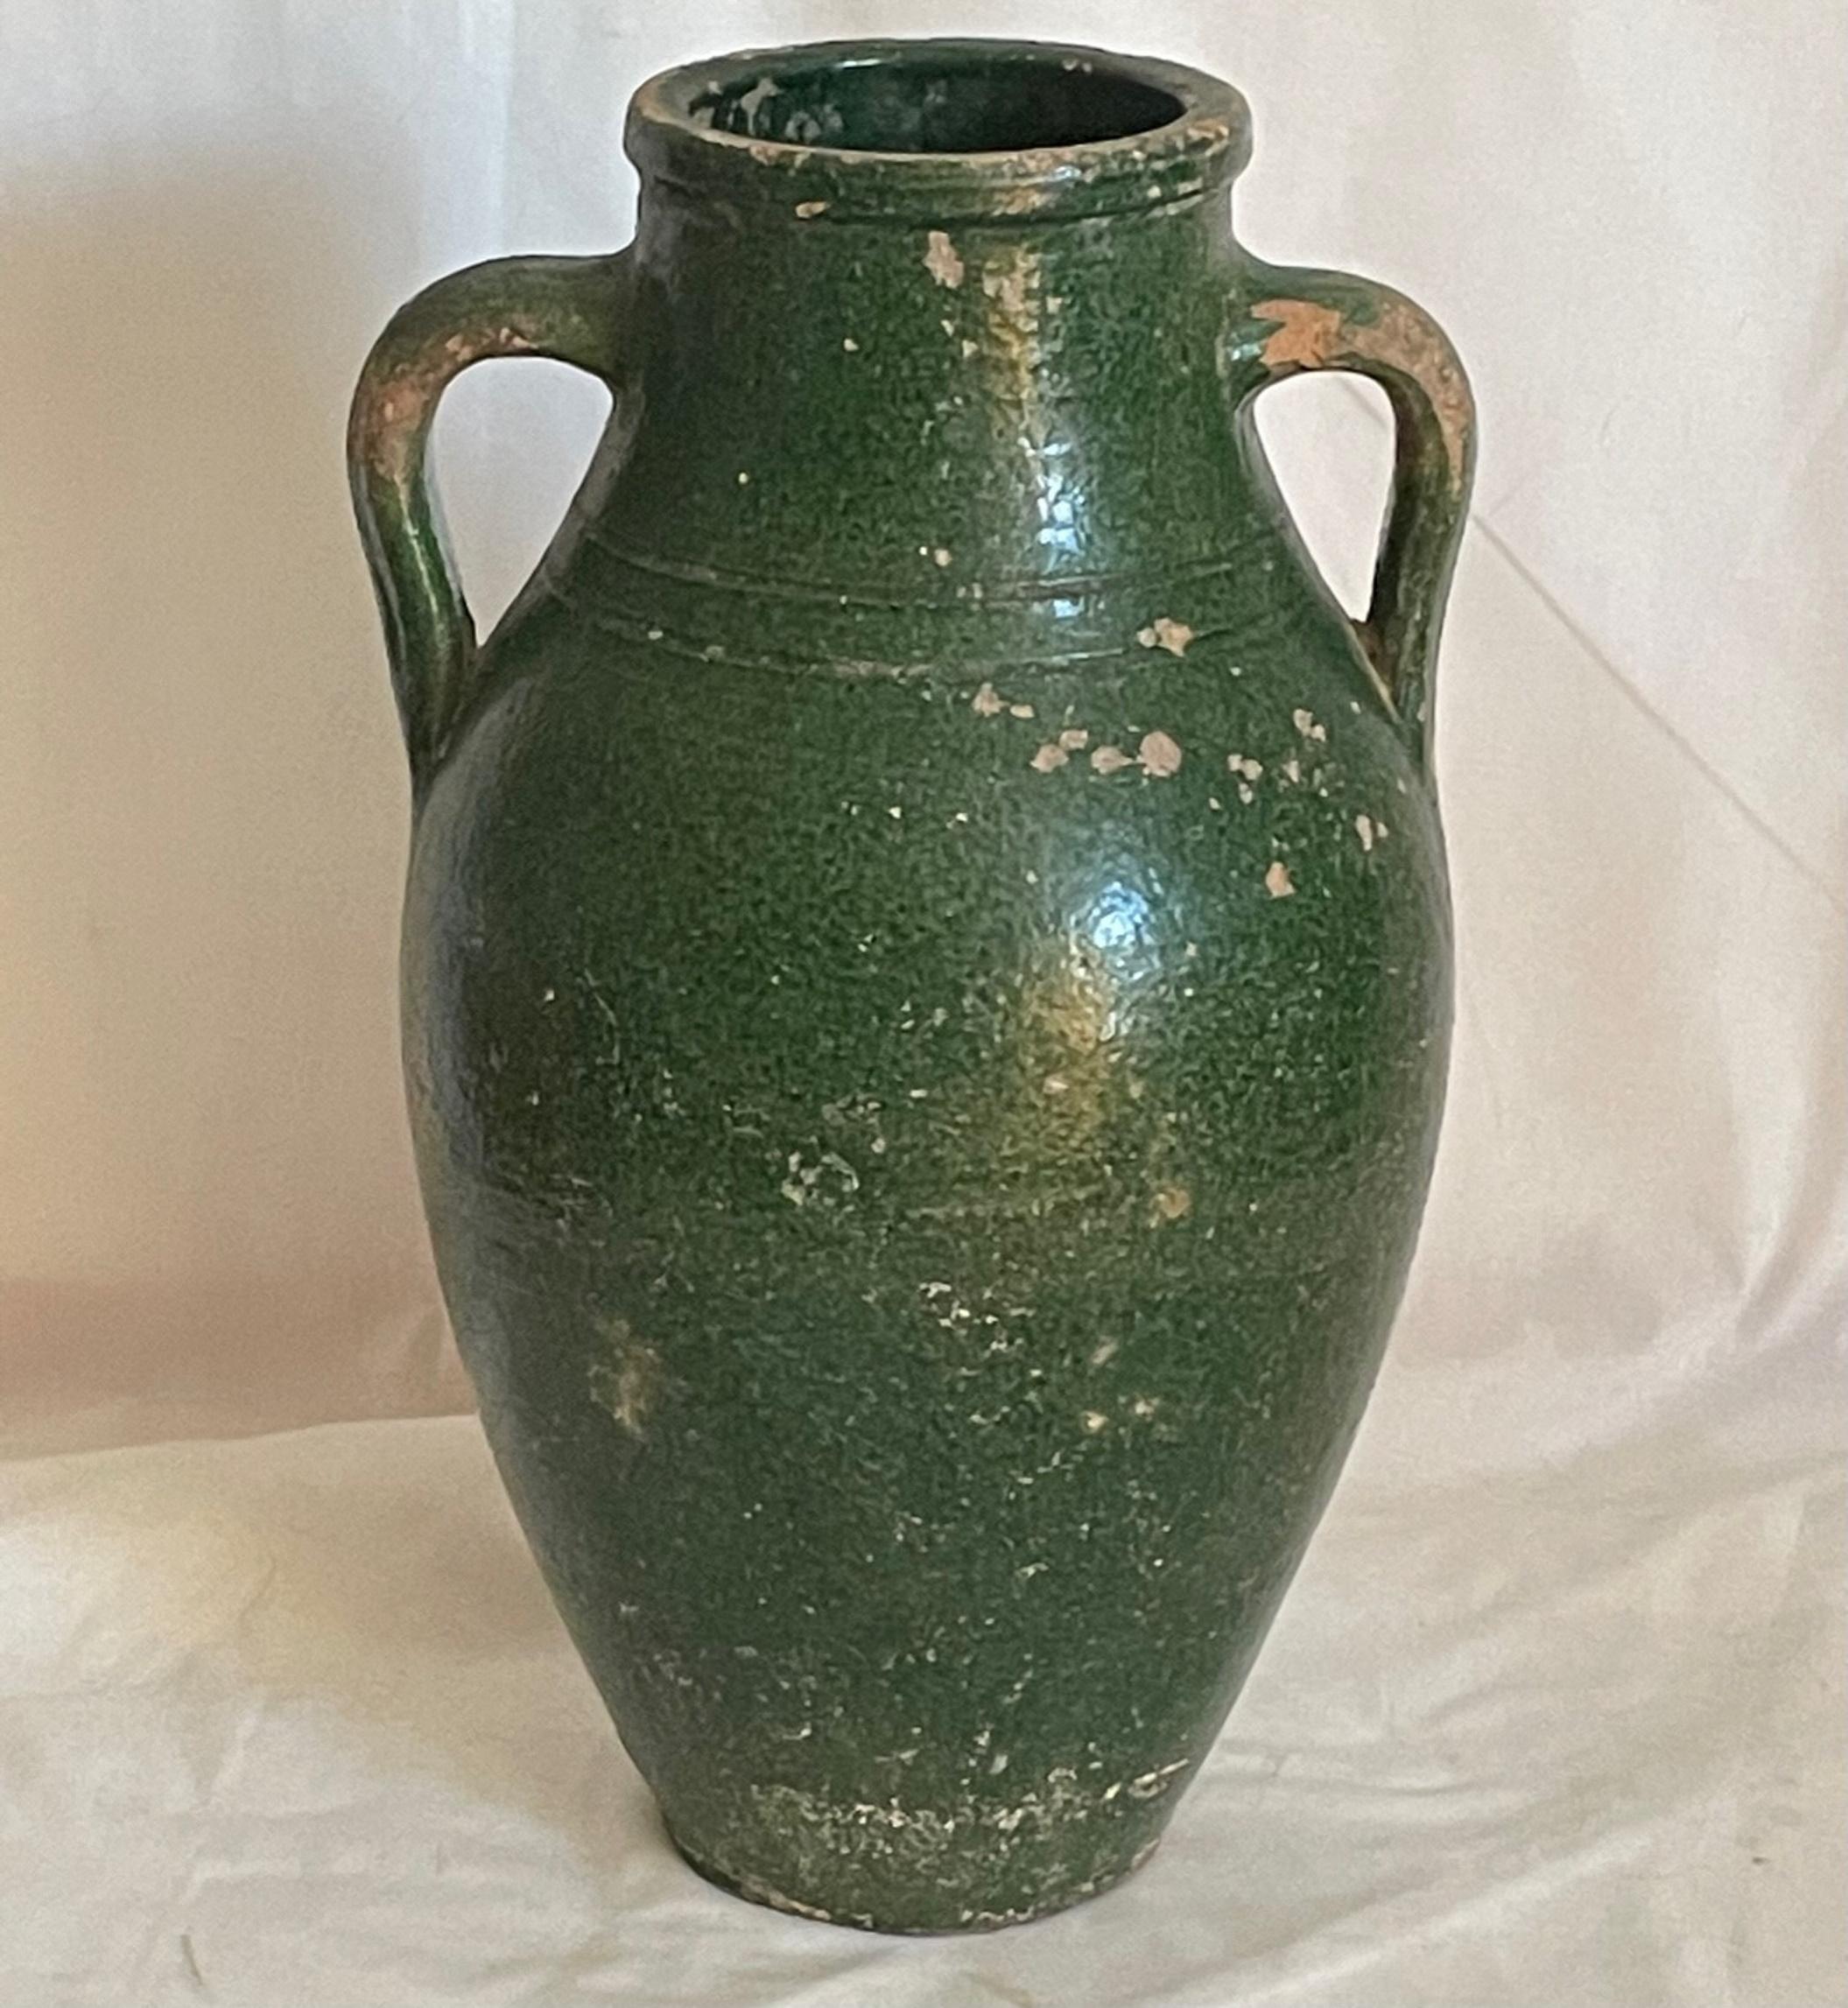 19th Century French Terracotta Amphora olive jar.

French provincial double handle amphora vessel with green glaze from the 19th century. The terracotta jug features a green glazed body with a nicely distressed patina. Probably created for the